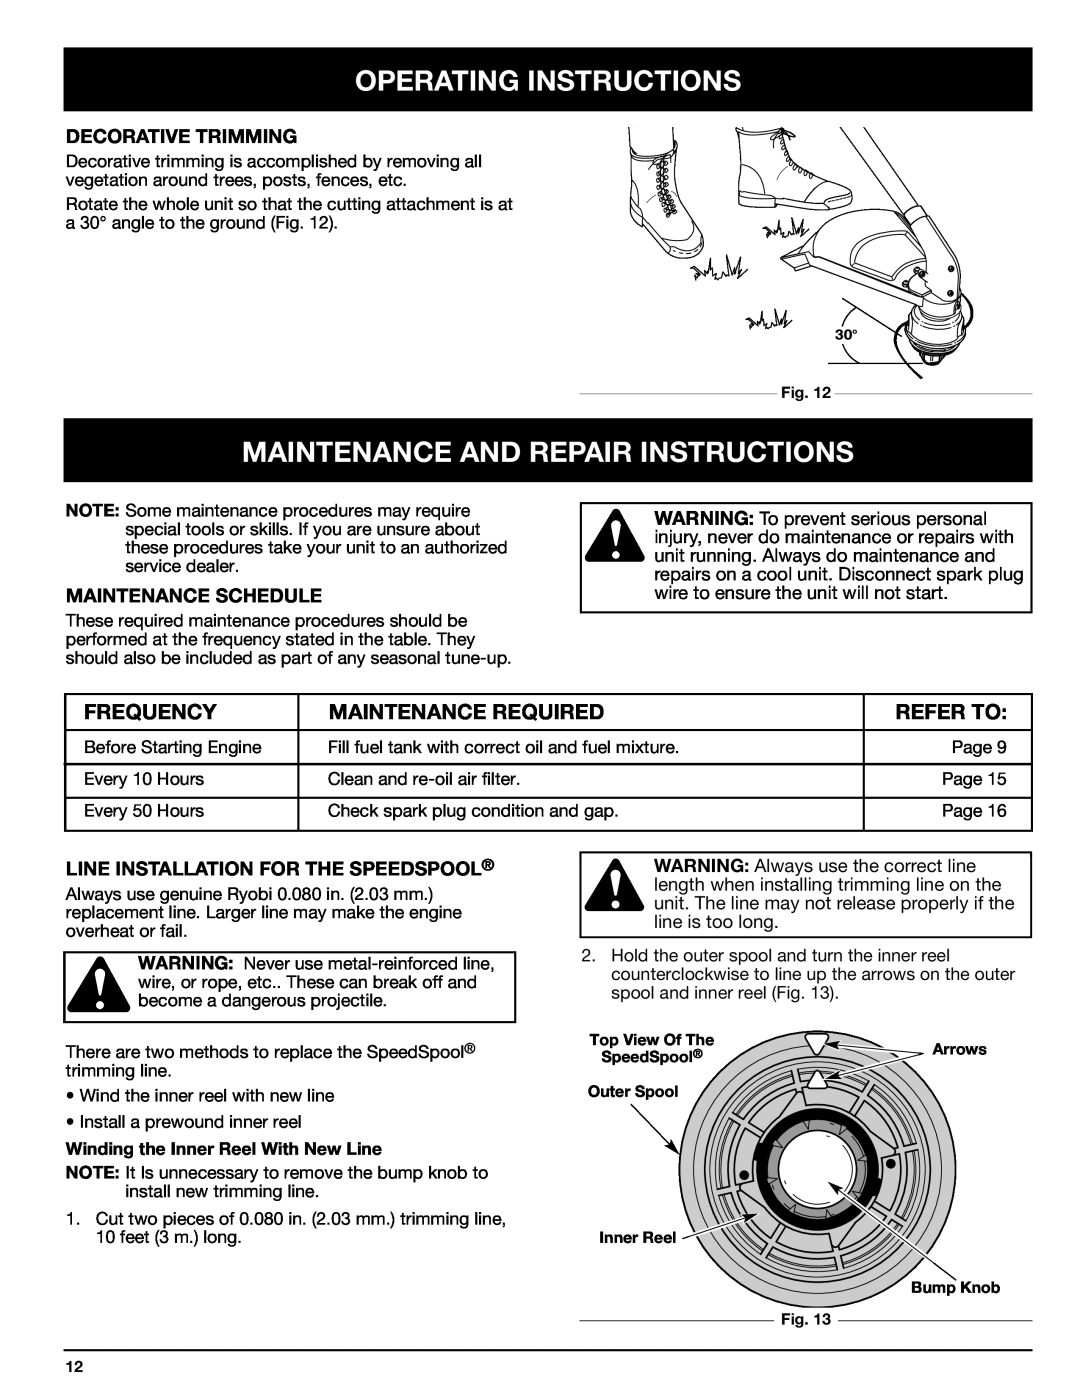 Ryobi 767rj manual Maintenance And Repair Instructions, Frequency, Maintenance Required, Refer To, Operating Instructions 